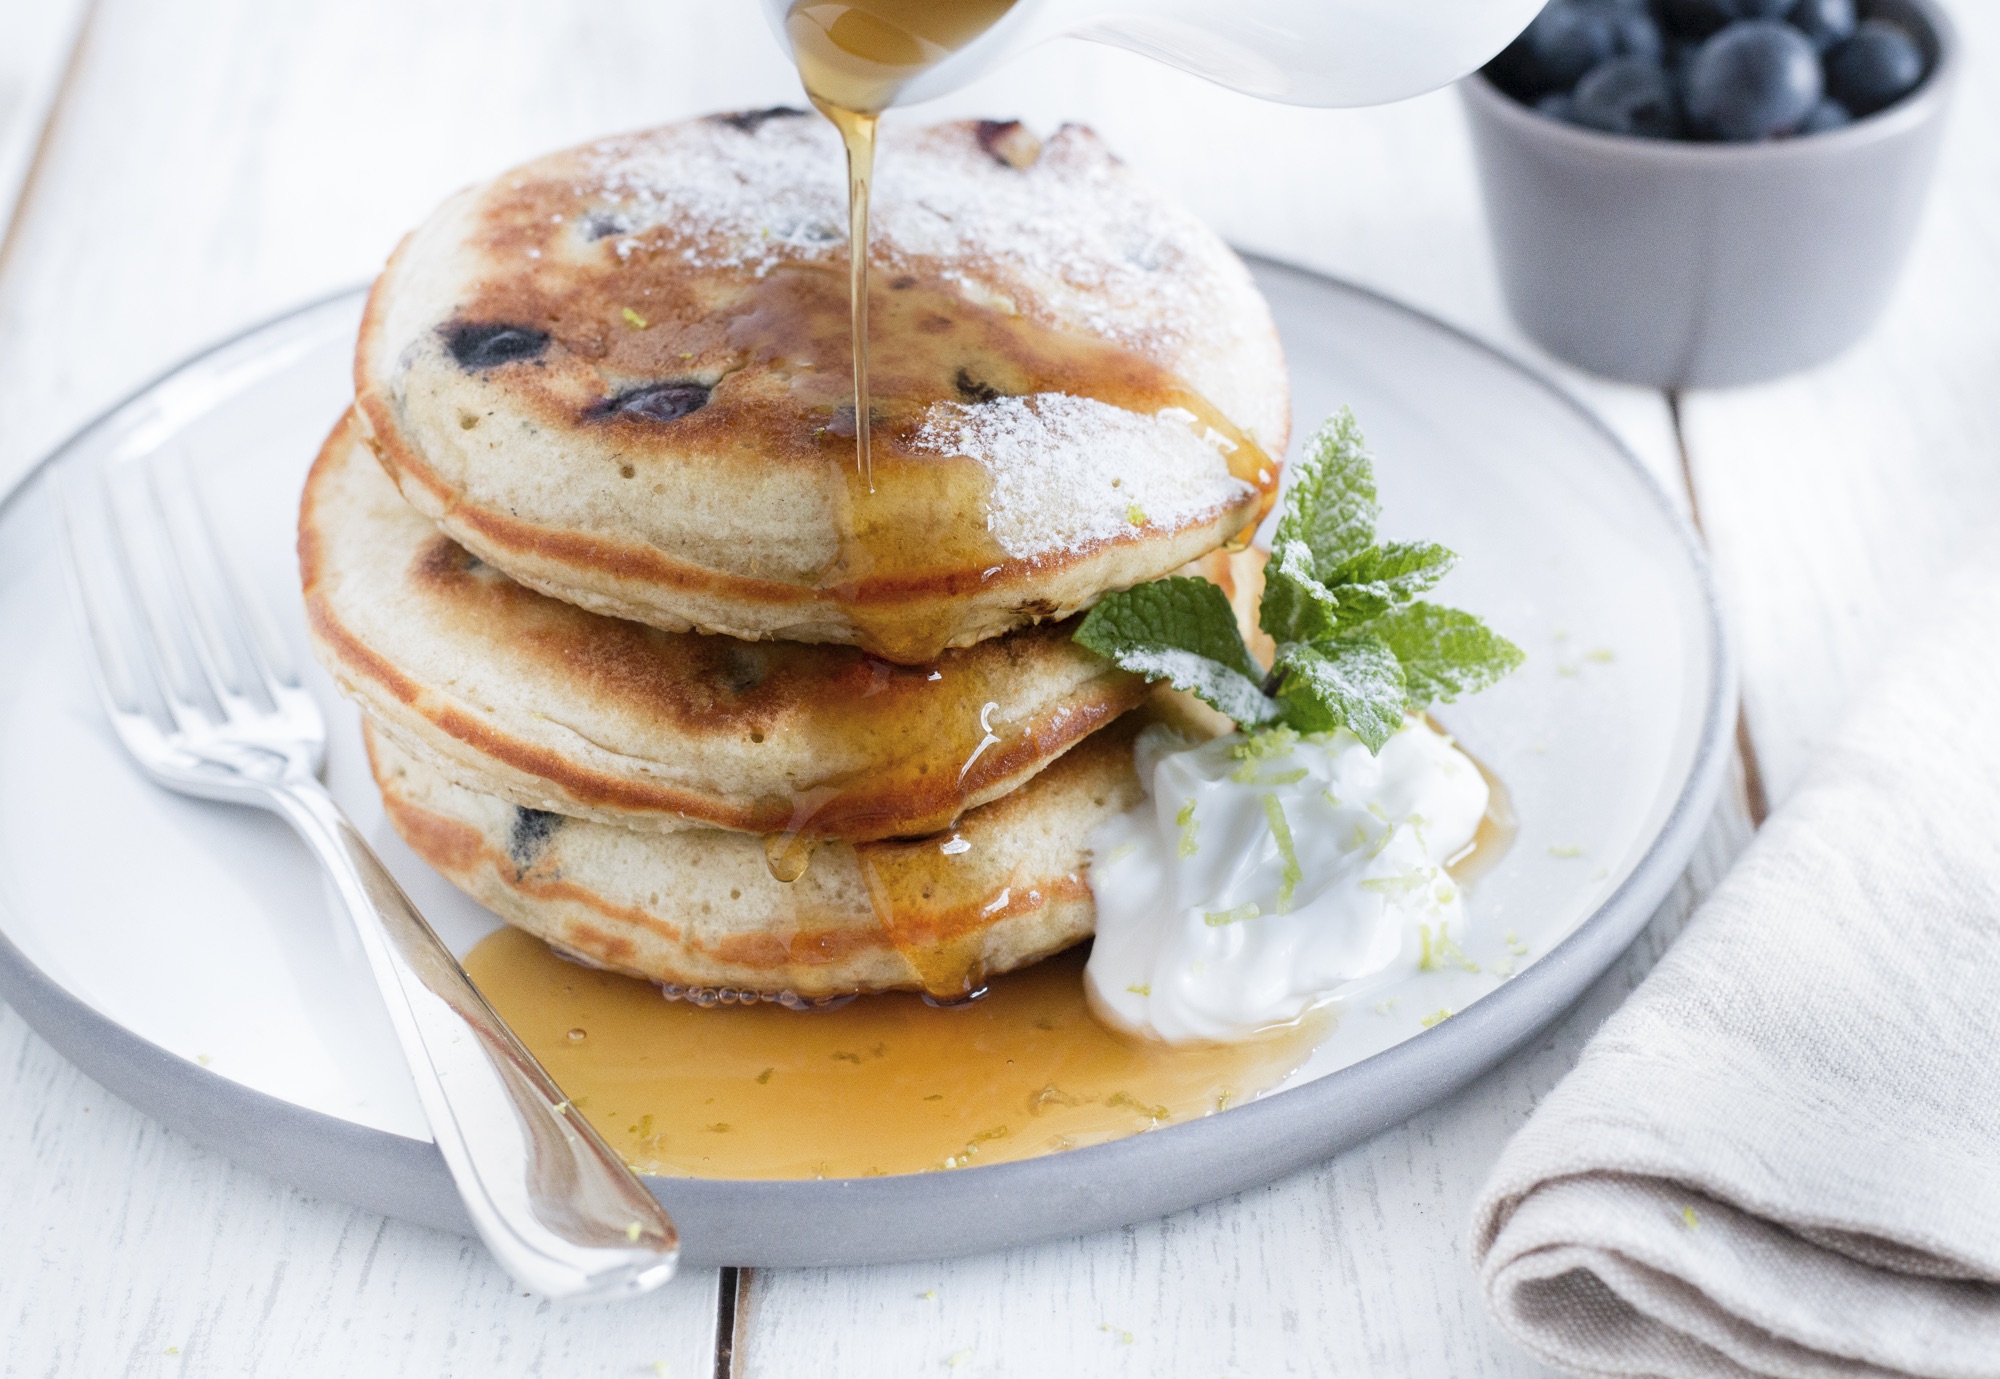 A stack of Blueberry and lime Scotch pancakes with maple syrup